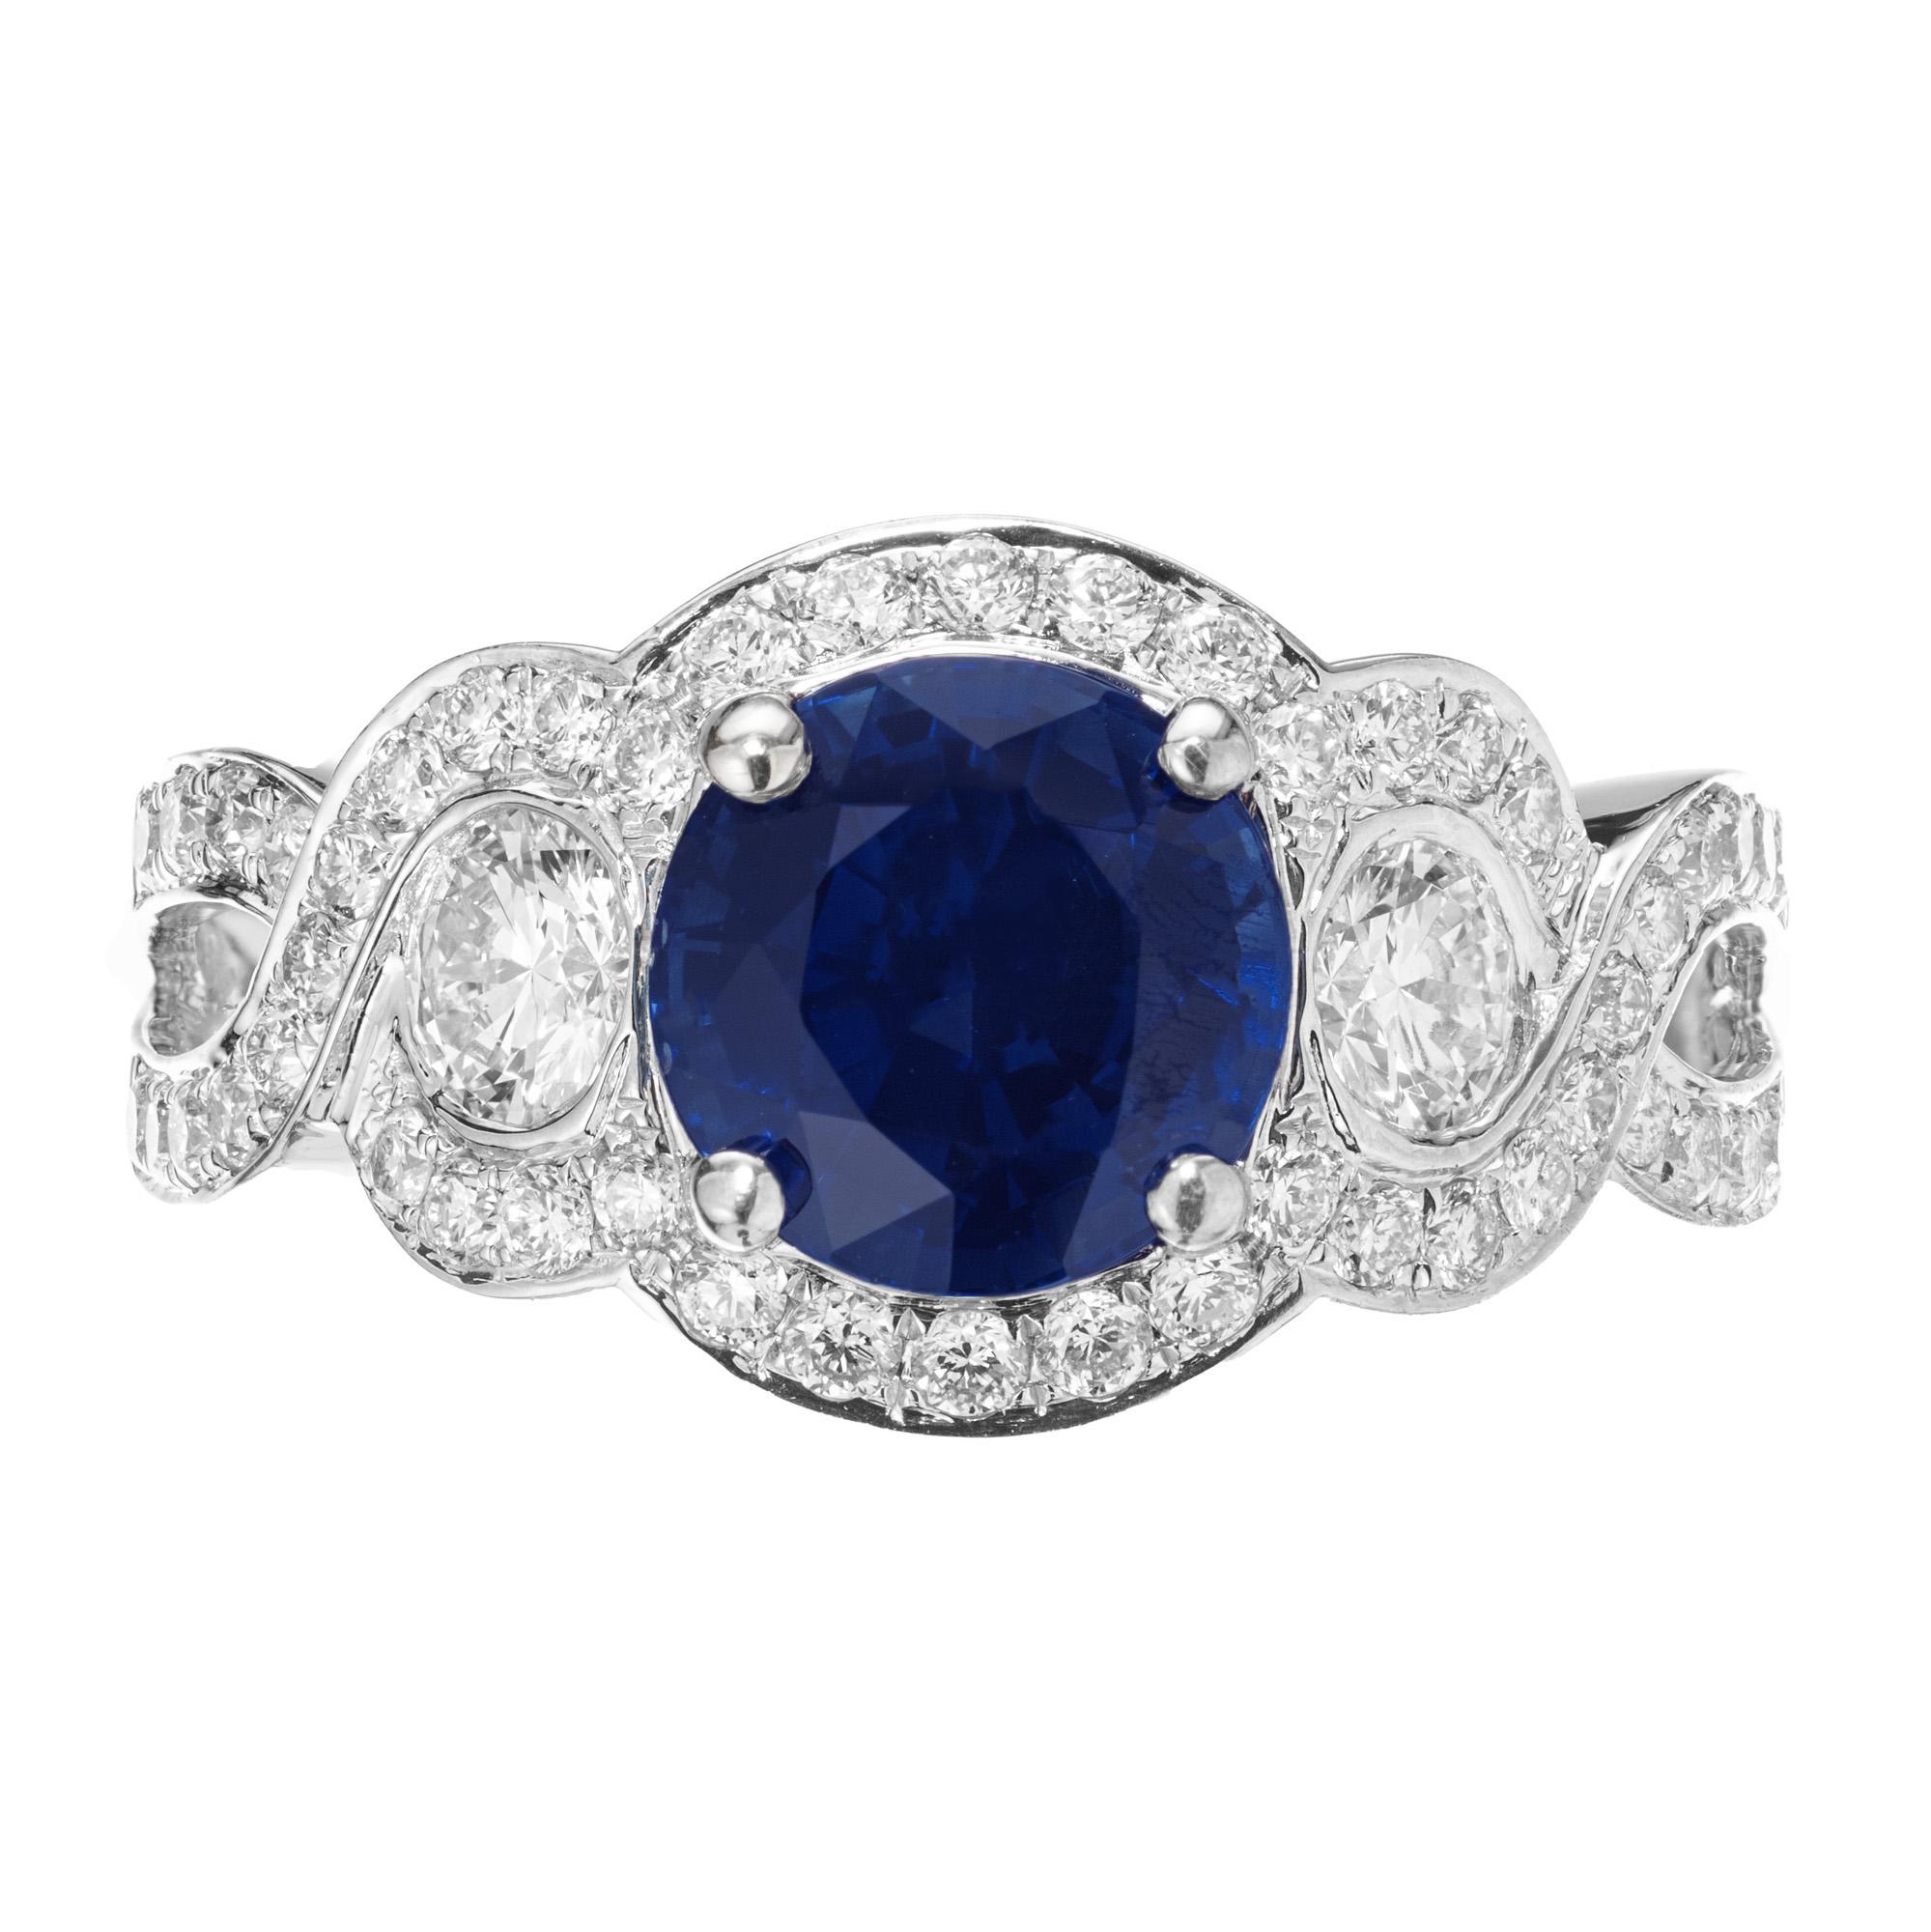 Royal Blue Round Sapphire Diamond Swirl engagement ring. This rich blue GIA certified sapphire is set in a swirl design 18k white gold setting. The center sapphire is accented with two round cut diamonds and surrounded by a halo of round diamonds